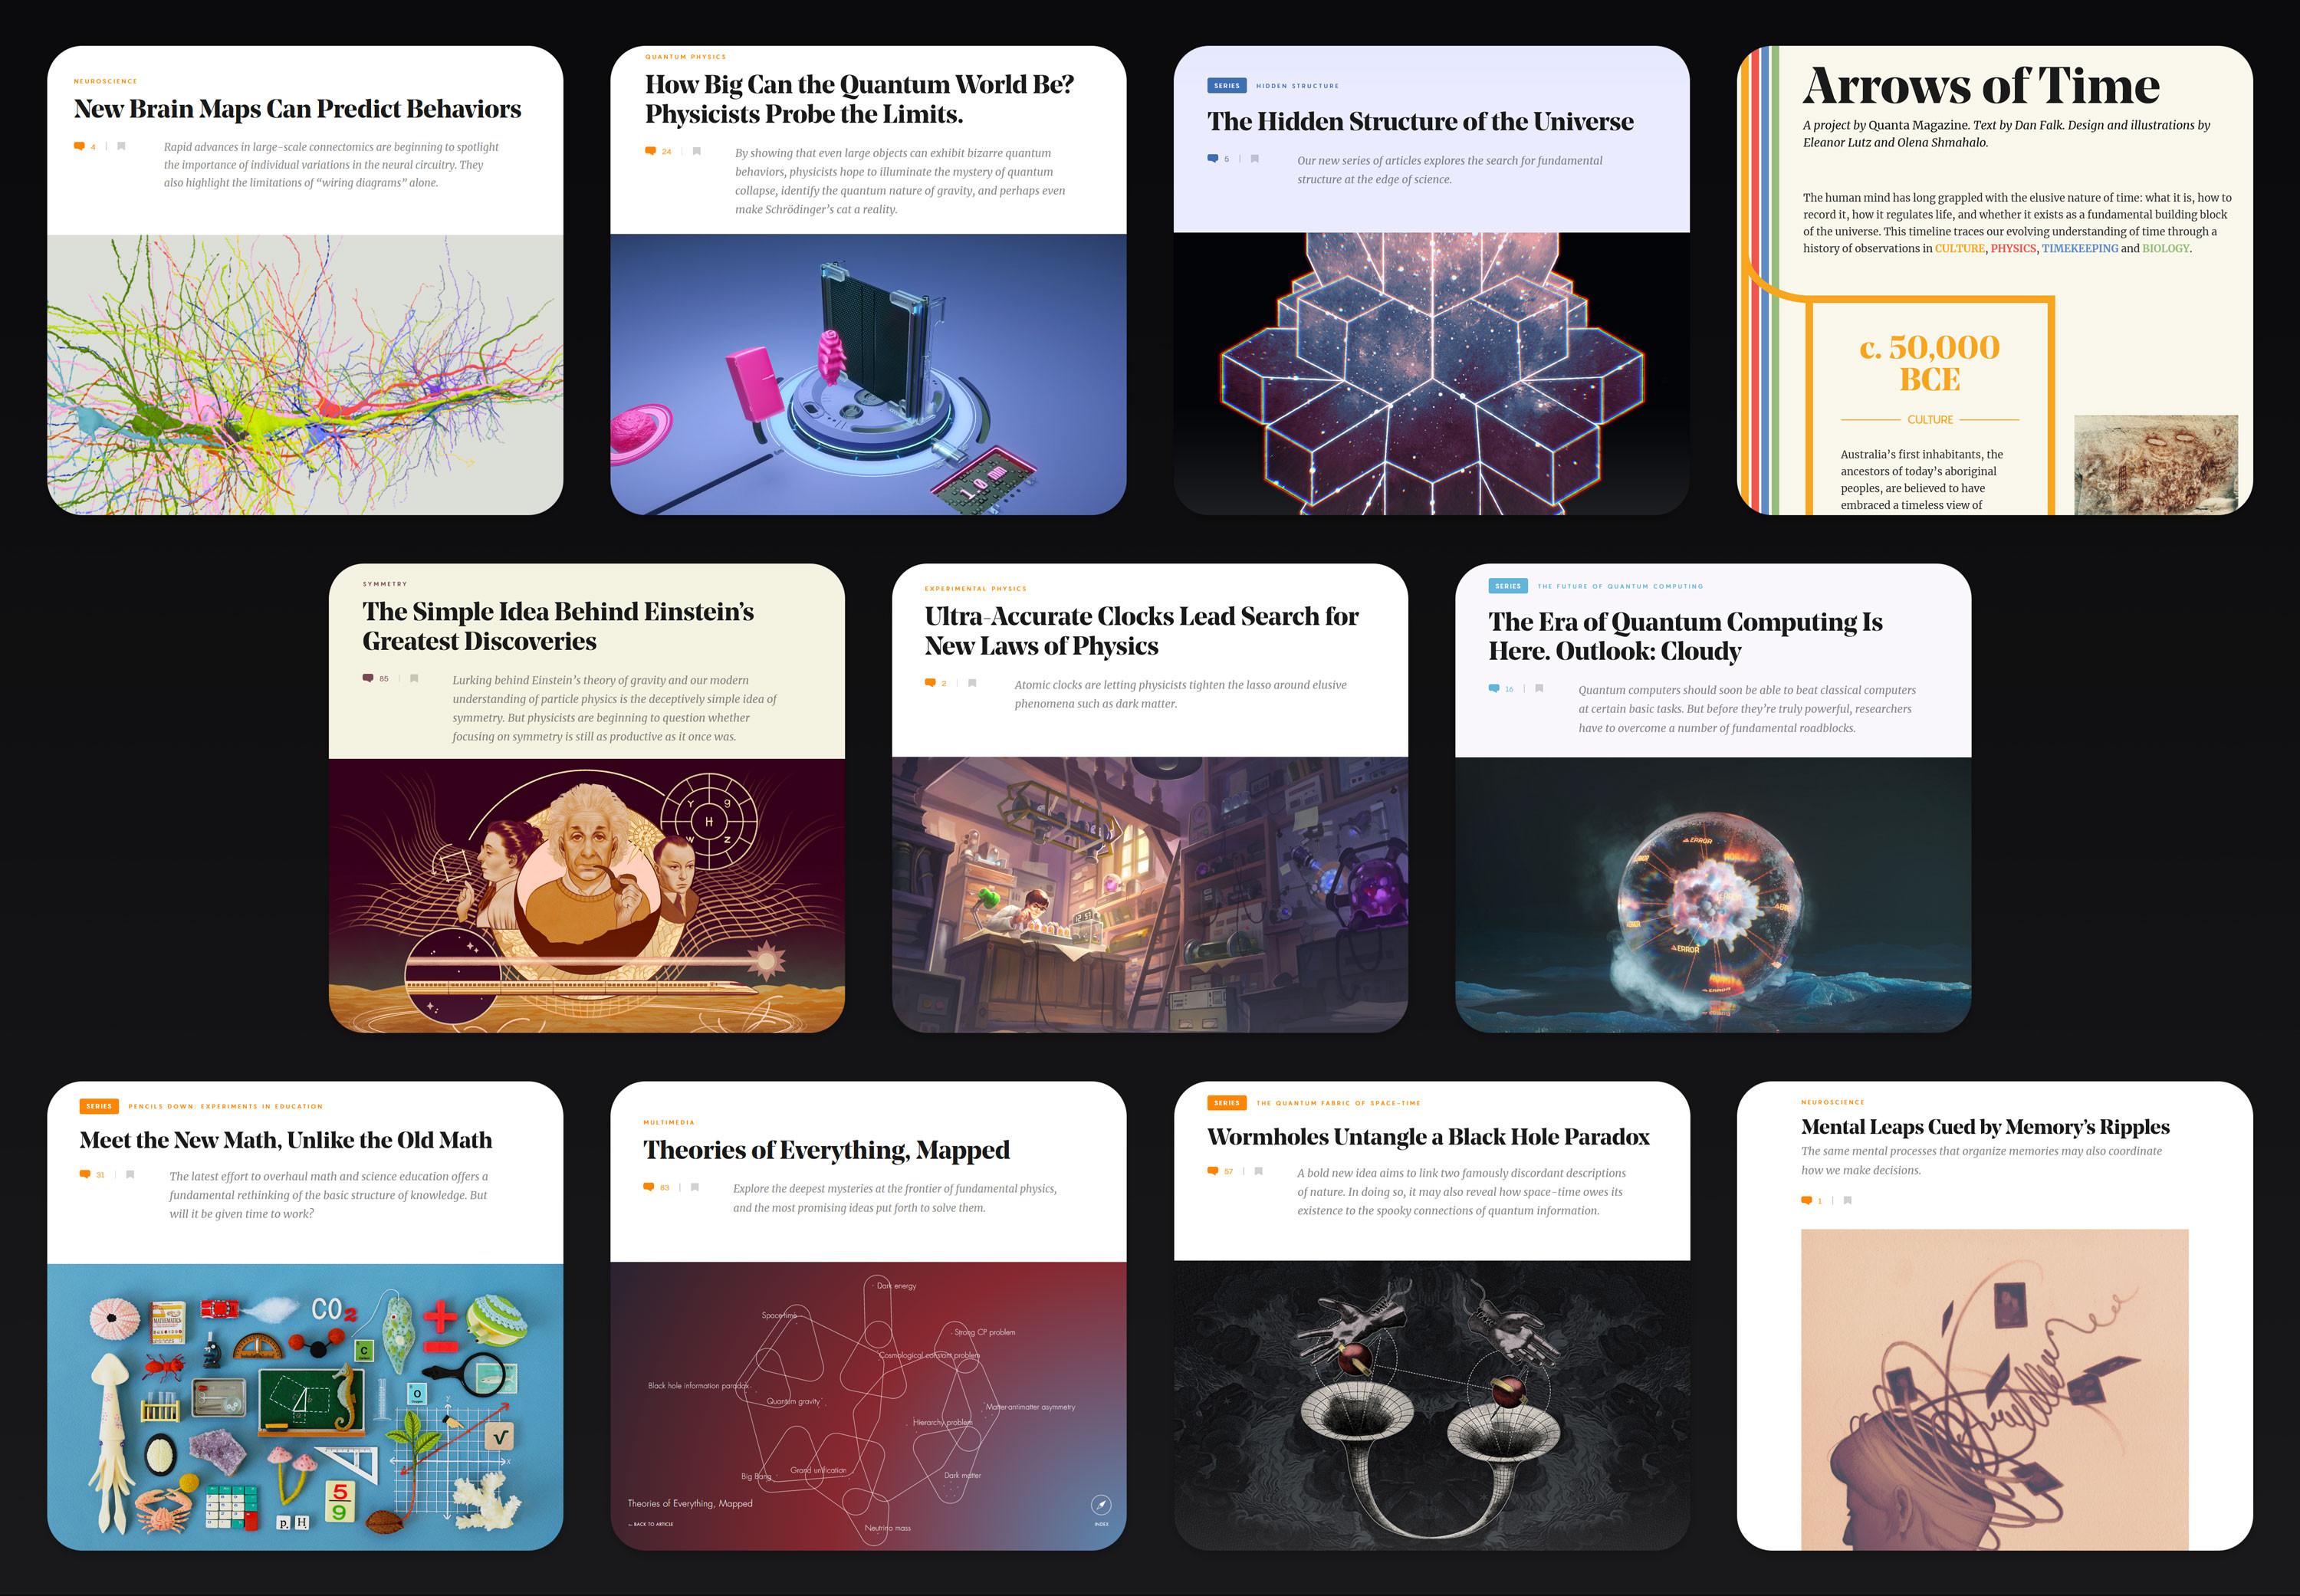 A small selection (out of hundreds of articles) I art-directed from 2014-2021 ↑
More (Pinterest): https://pin.it/3qK0JdJ

Lede art I created, on Quanta:
https://tinyurl.com/QuantaMag-Olena

A few more illustrations &amp; photoshoots I directed ↓